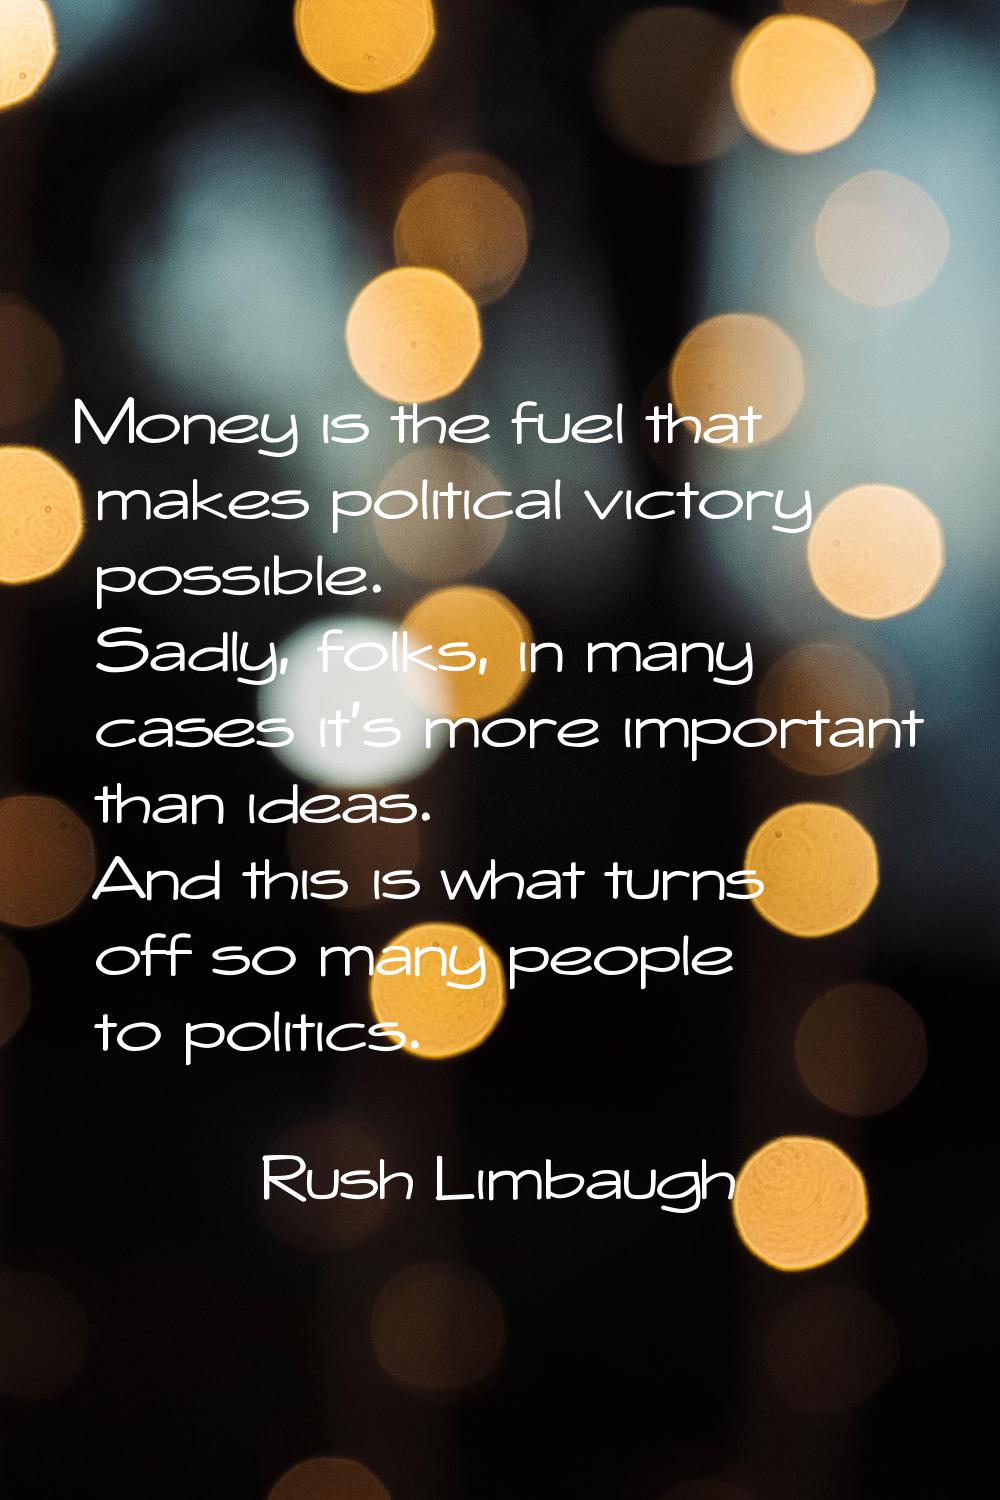 Money is the fuel that makes political victory possible. Sadly, folks, in many cases it's more impo